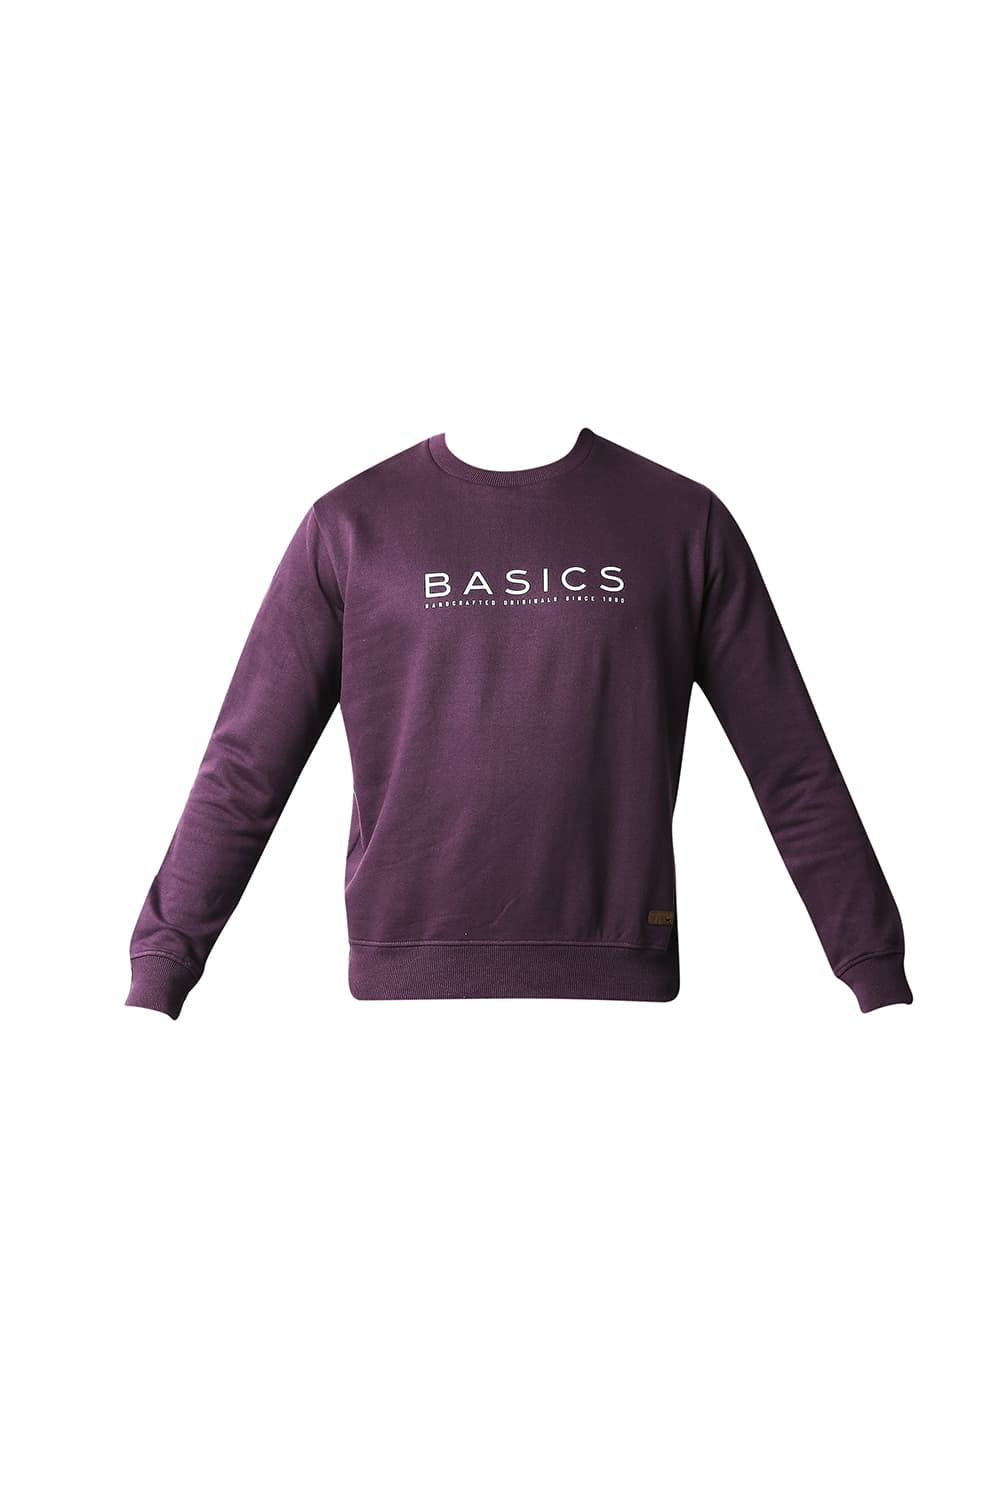 BASICS MUSCLE FIT BRUSHED FLEECE PULLOVER SWEATER